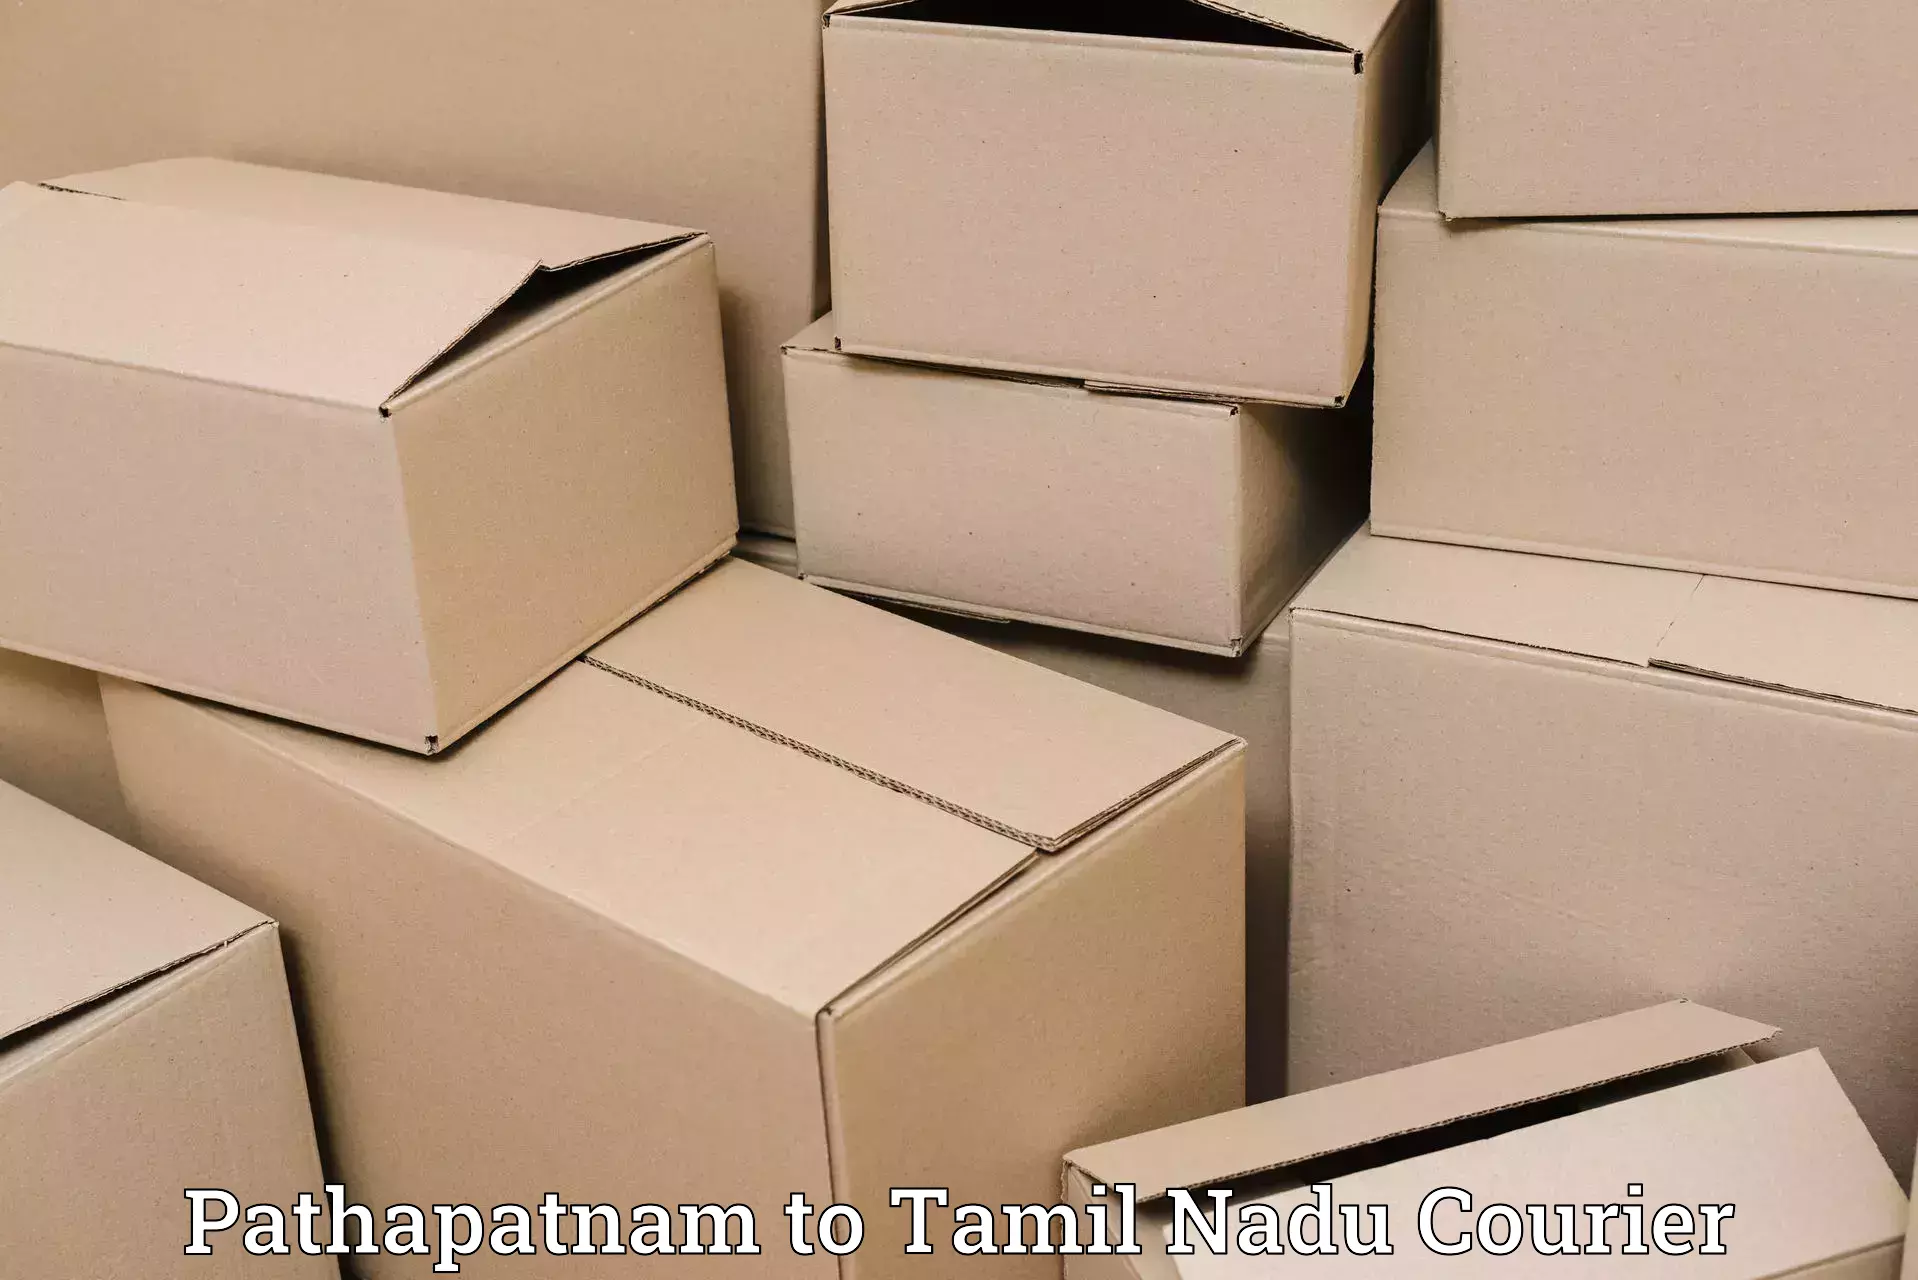 Courier tracking online Pathapatnam to Ennore Port Chennai